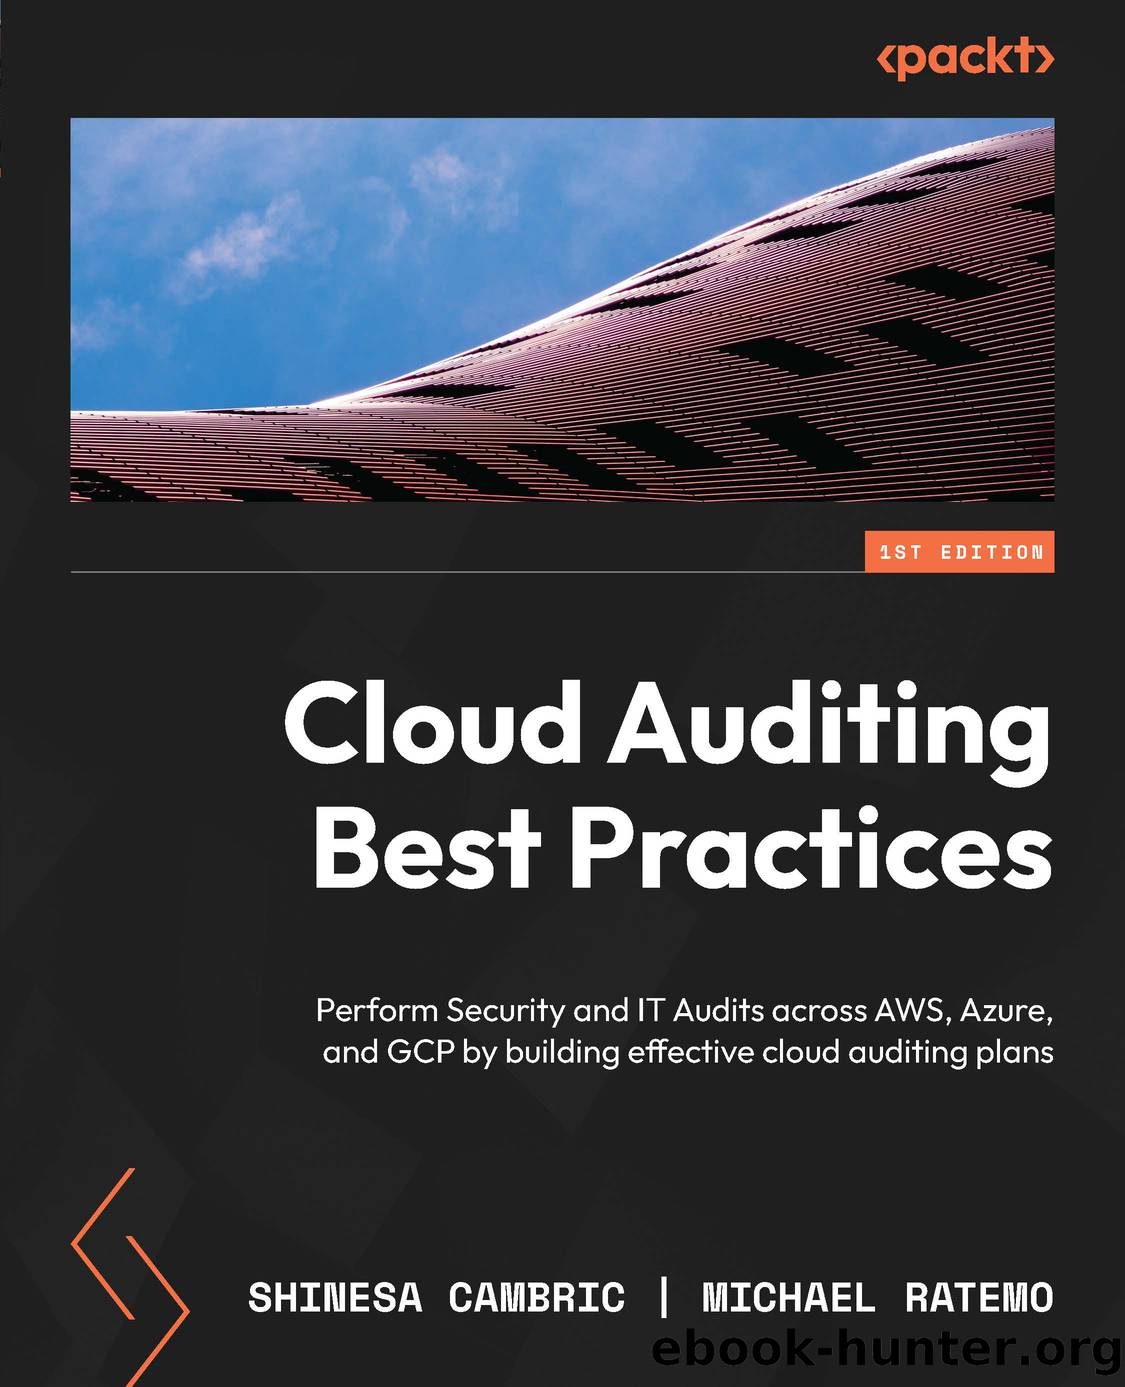 Cloud Auditing Best Practices by Shinesa Cambric & Michael Ratemo